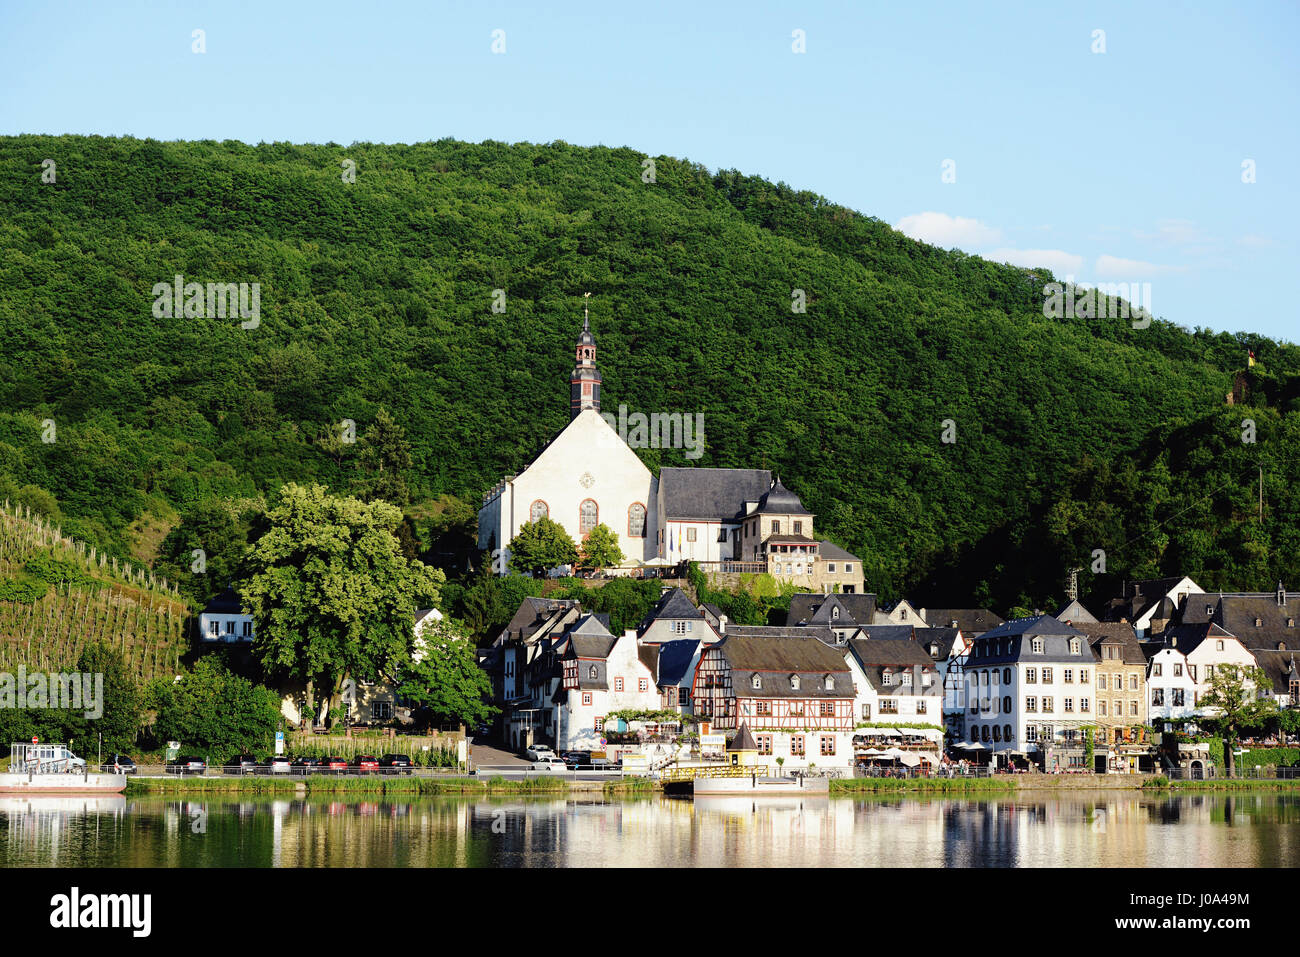 BEILSTEIN, RHINELAND-PALATINATE/ Germany September 08 2016: Cityscape of village Beilstein at Moselle river with its small streets and half-timbered h Stock Photo